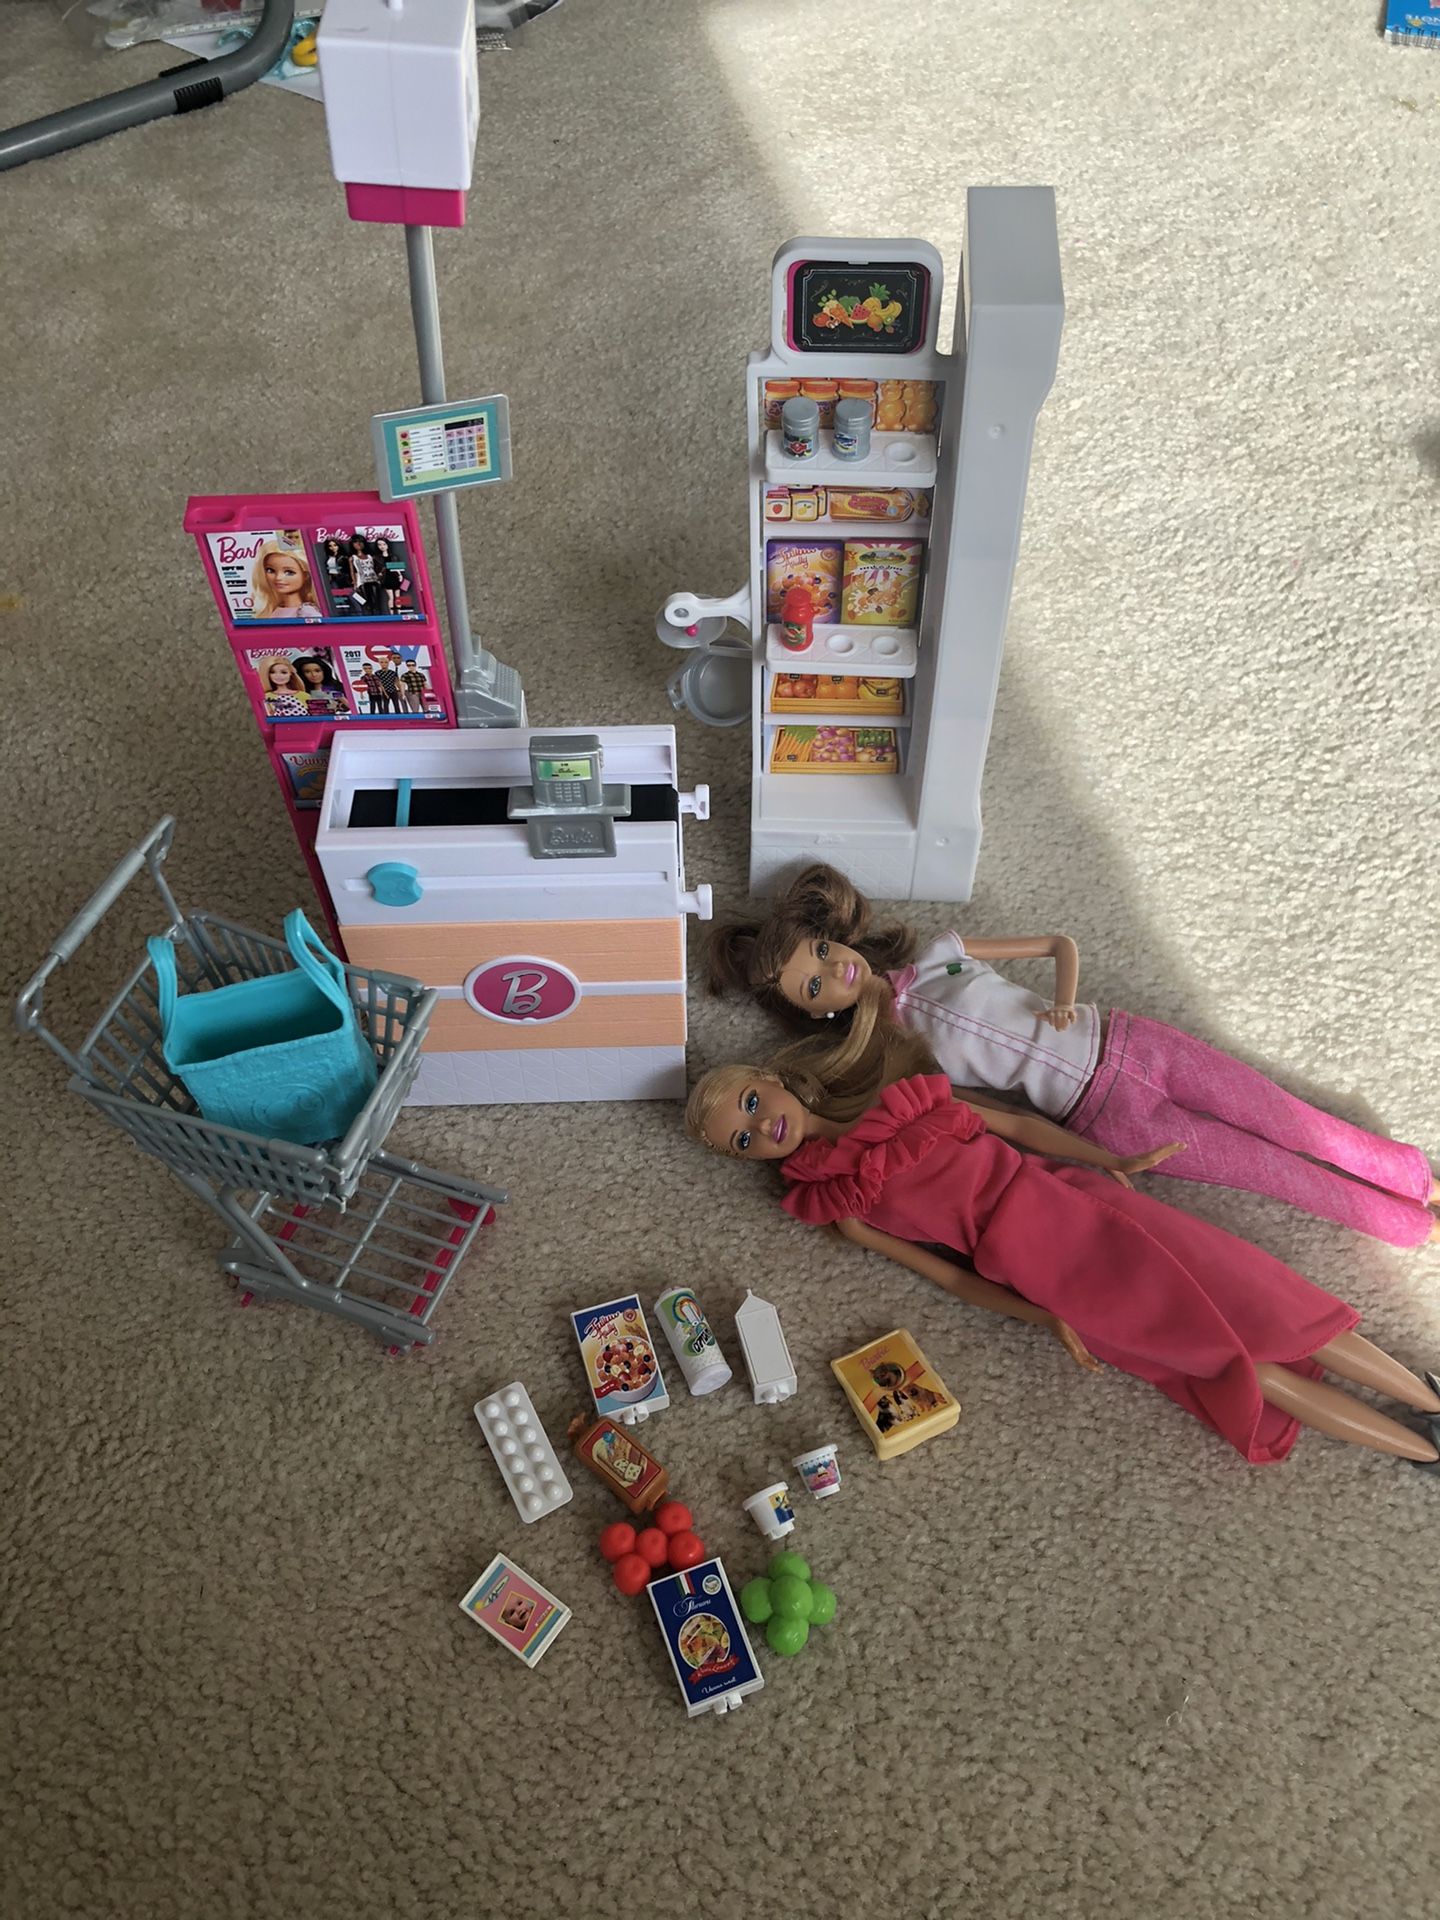 Barbie grocery store set with two barbies